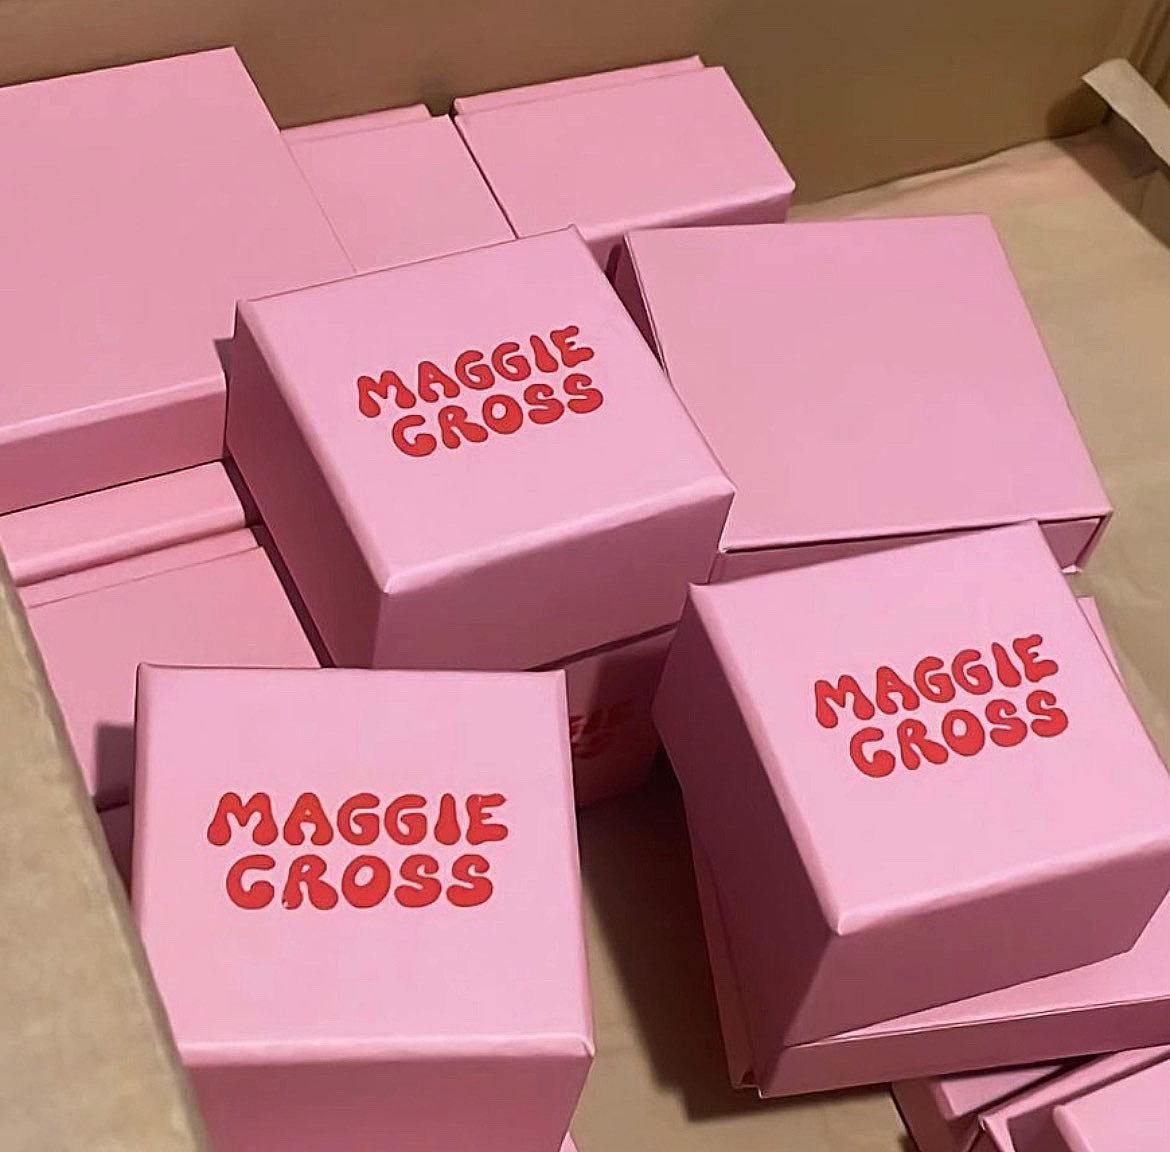 Luv these new pink boxes so much 🎀❤️

Eeeep, I&rsquo;ve got lots of exciting things happening atm. Some very fun customs in the works and some silly little bizniz ideas too 🫢

Shop is open 24hrs a day, 7 days a week at www.maggiecross.co.uk or you 